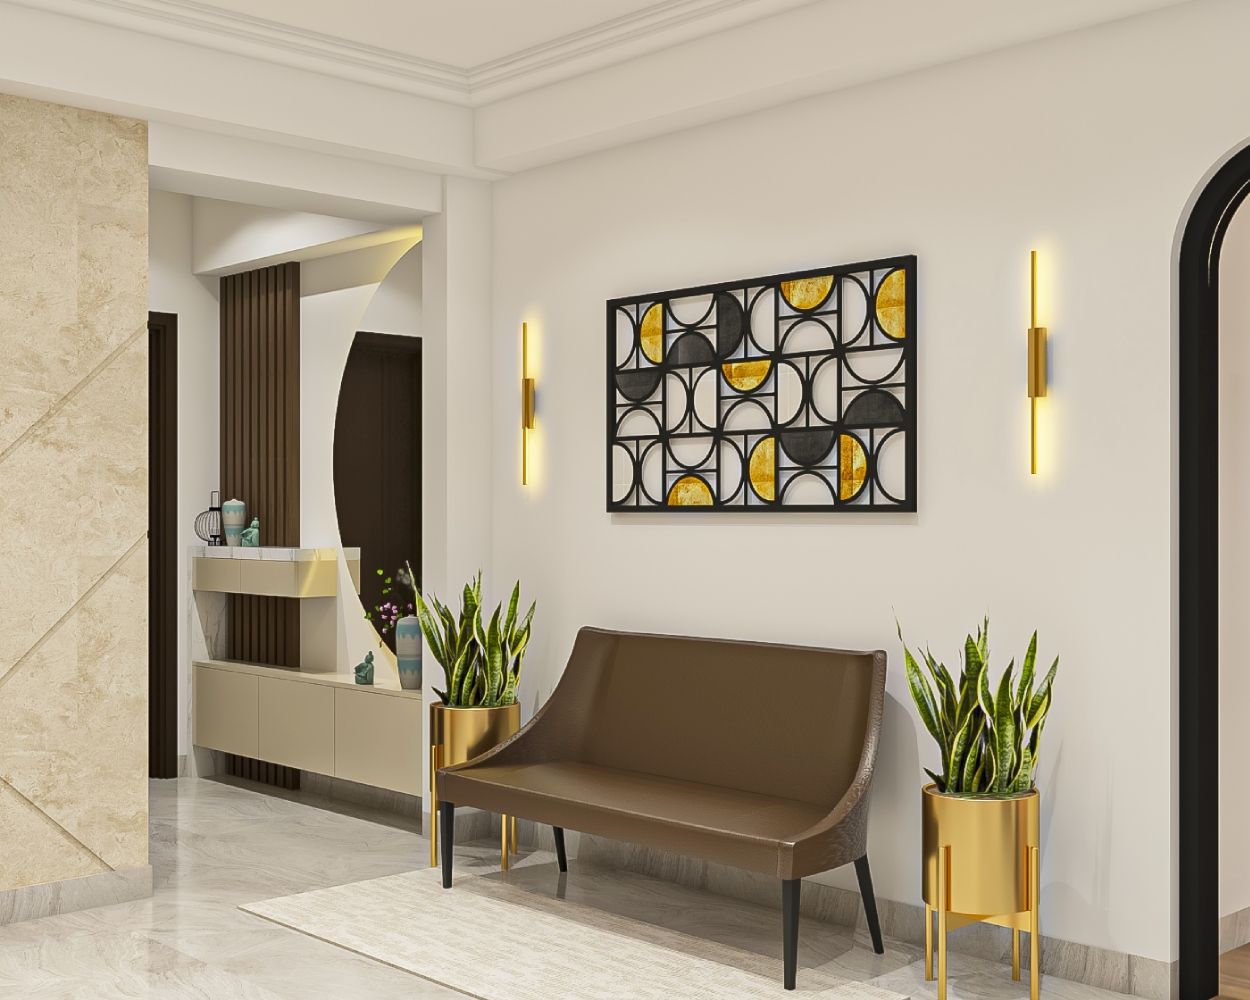 Modern Brown And Beige Foyer Design With Wall-Mounted Storage Unit